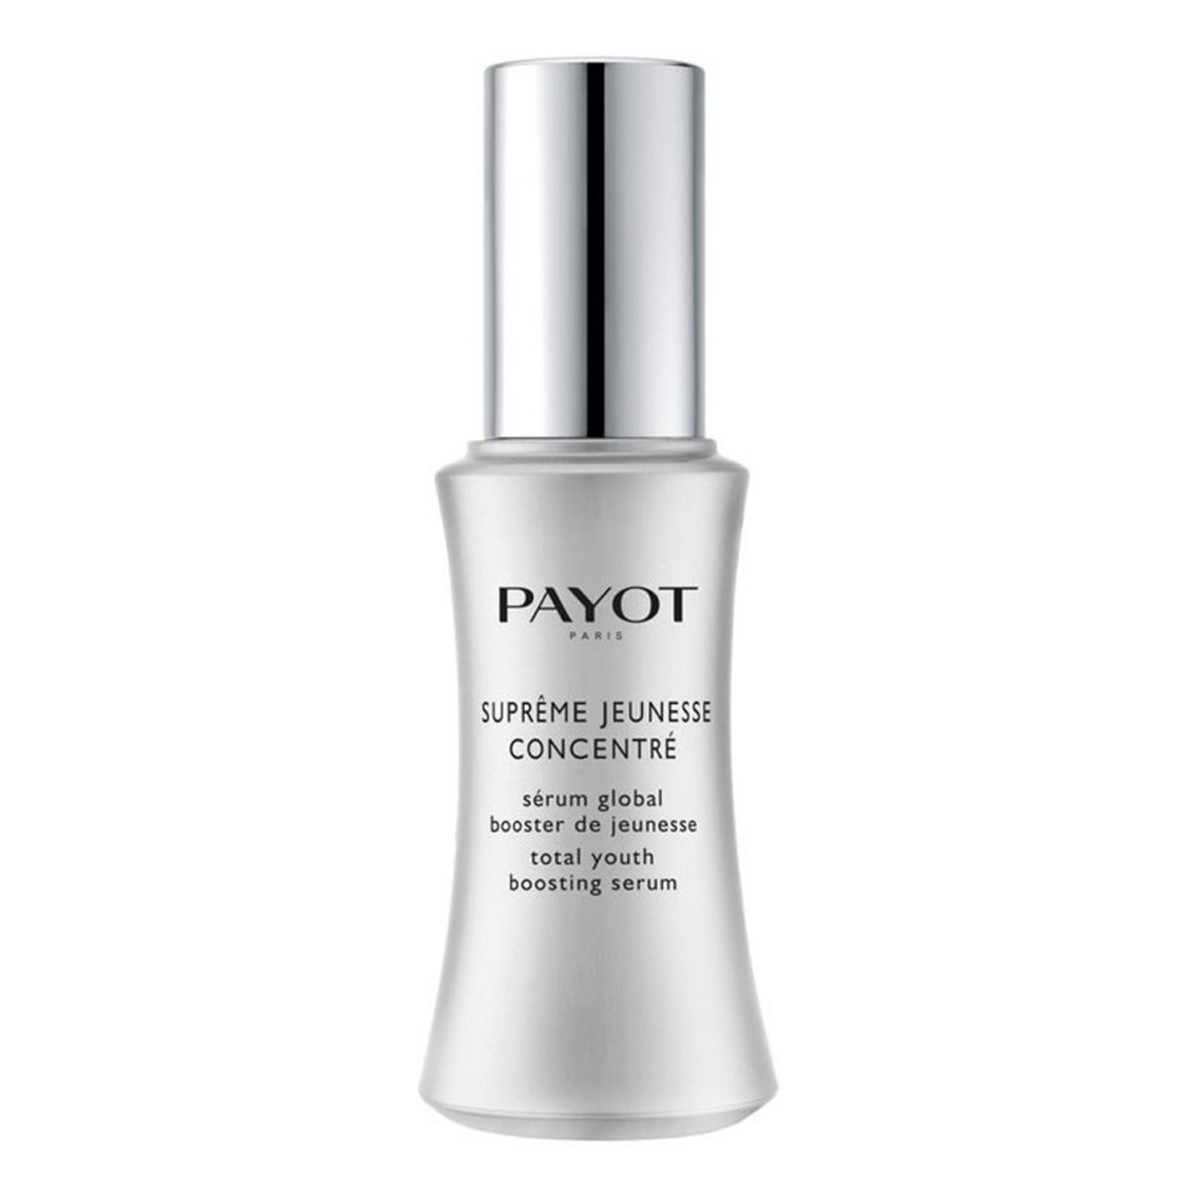 Payot Supreme Jeunesse Concentre Total Youth Boosting Serum Serum do twarzy 30ml